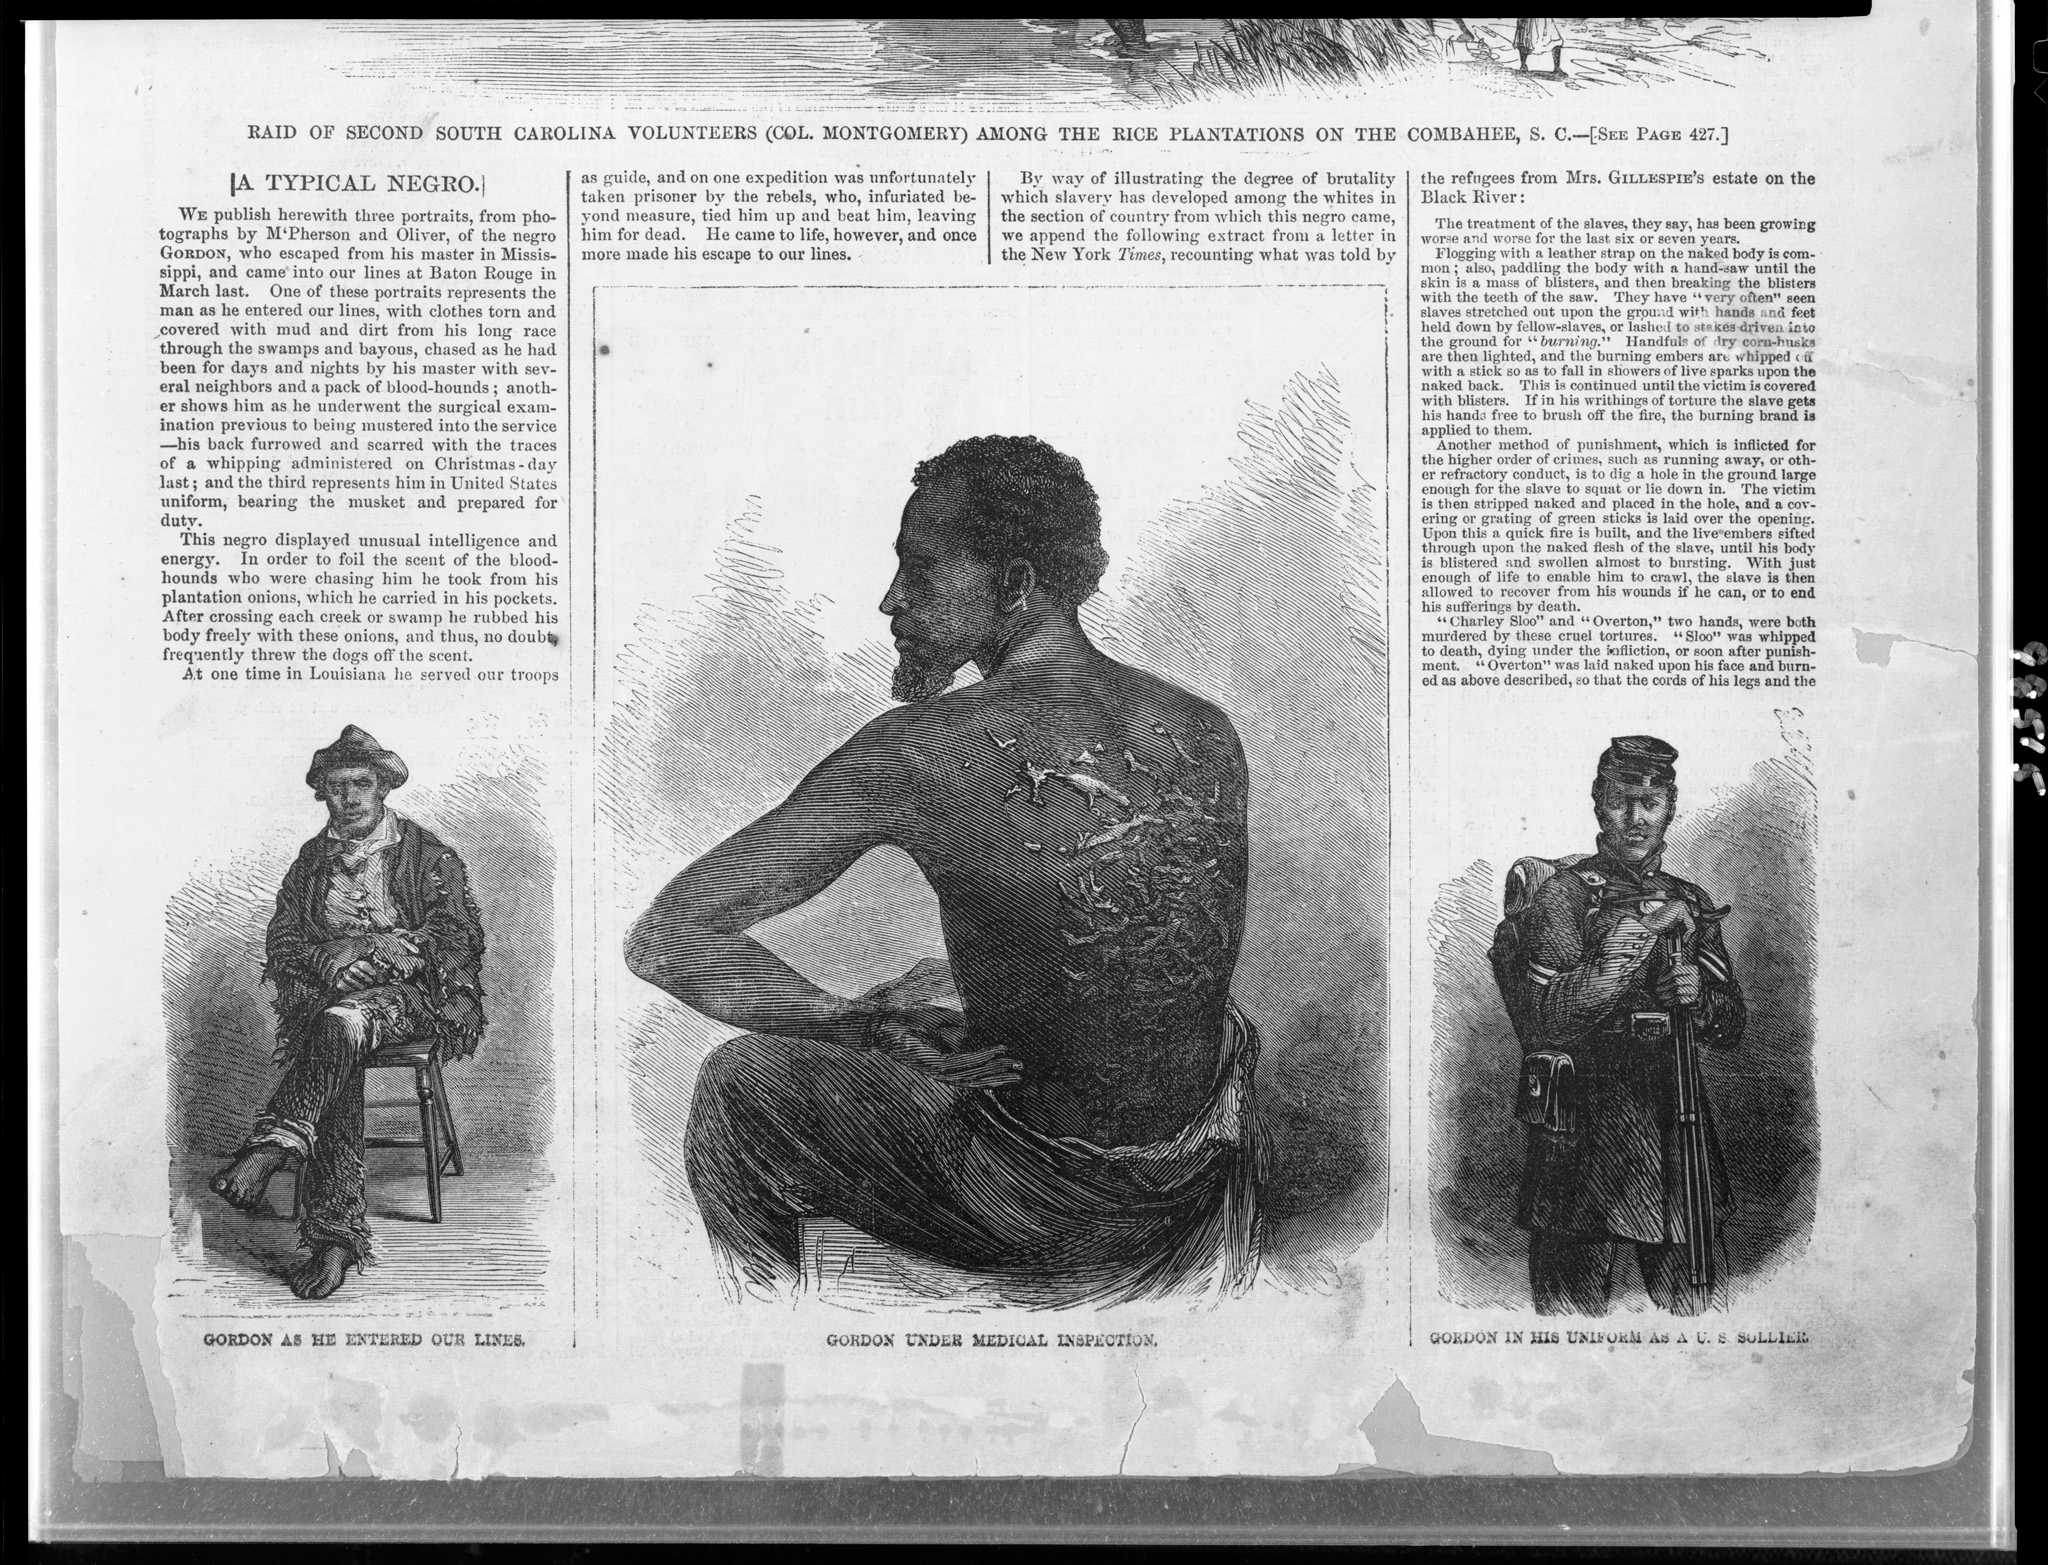 Image of 3 illustrations of  Private Gordon as he entered the union army, his back during medical inspection and in army uniform.